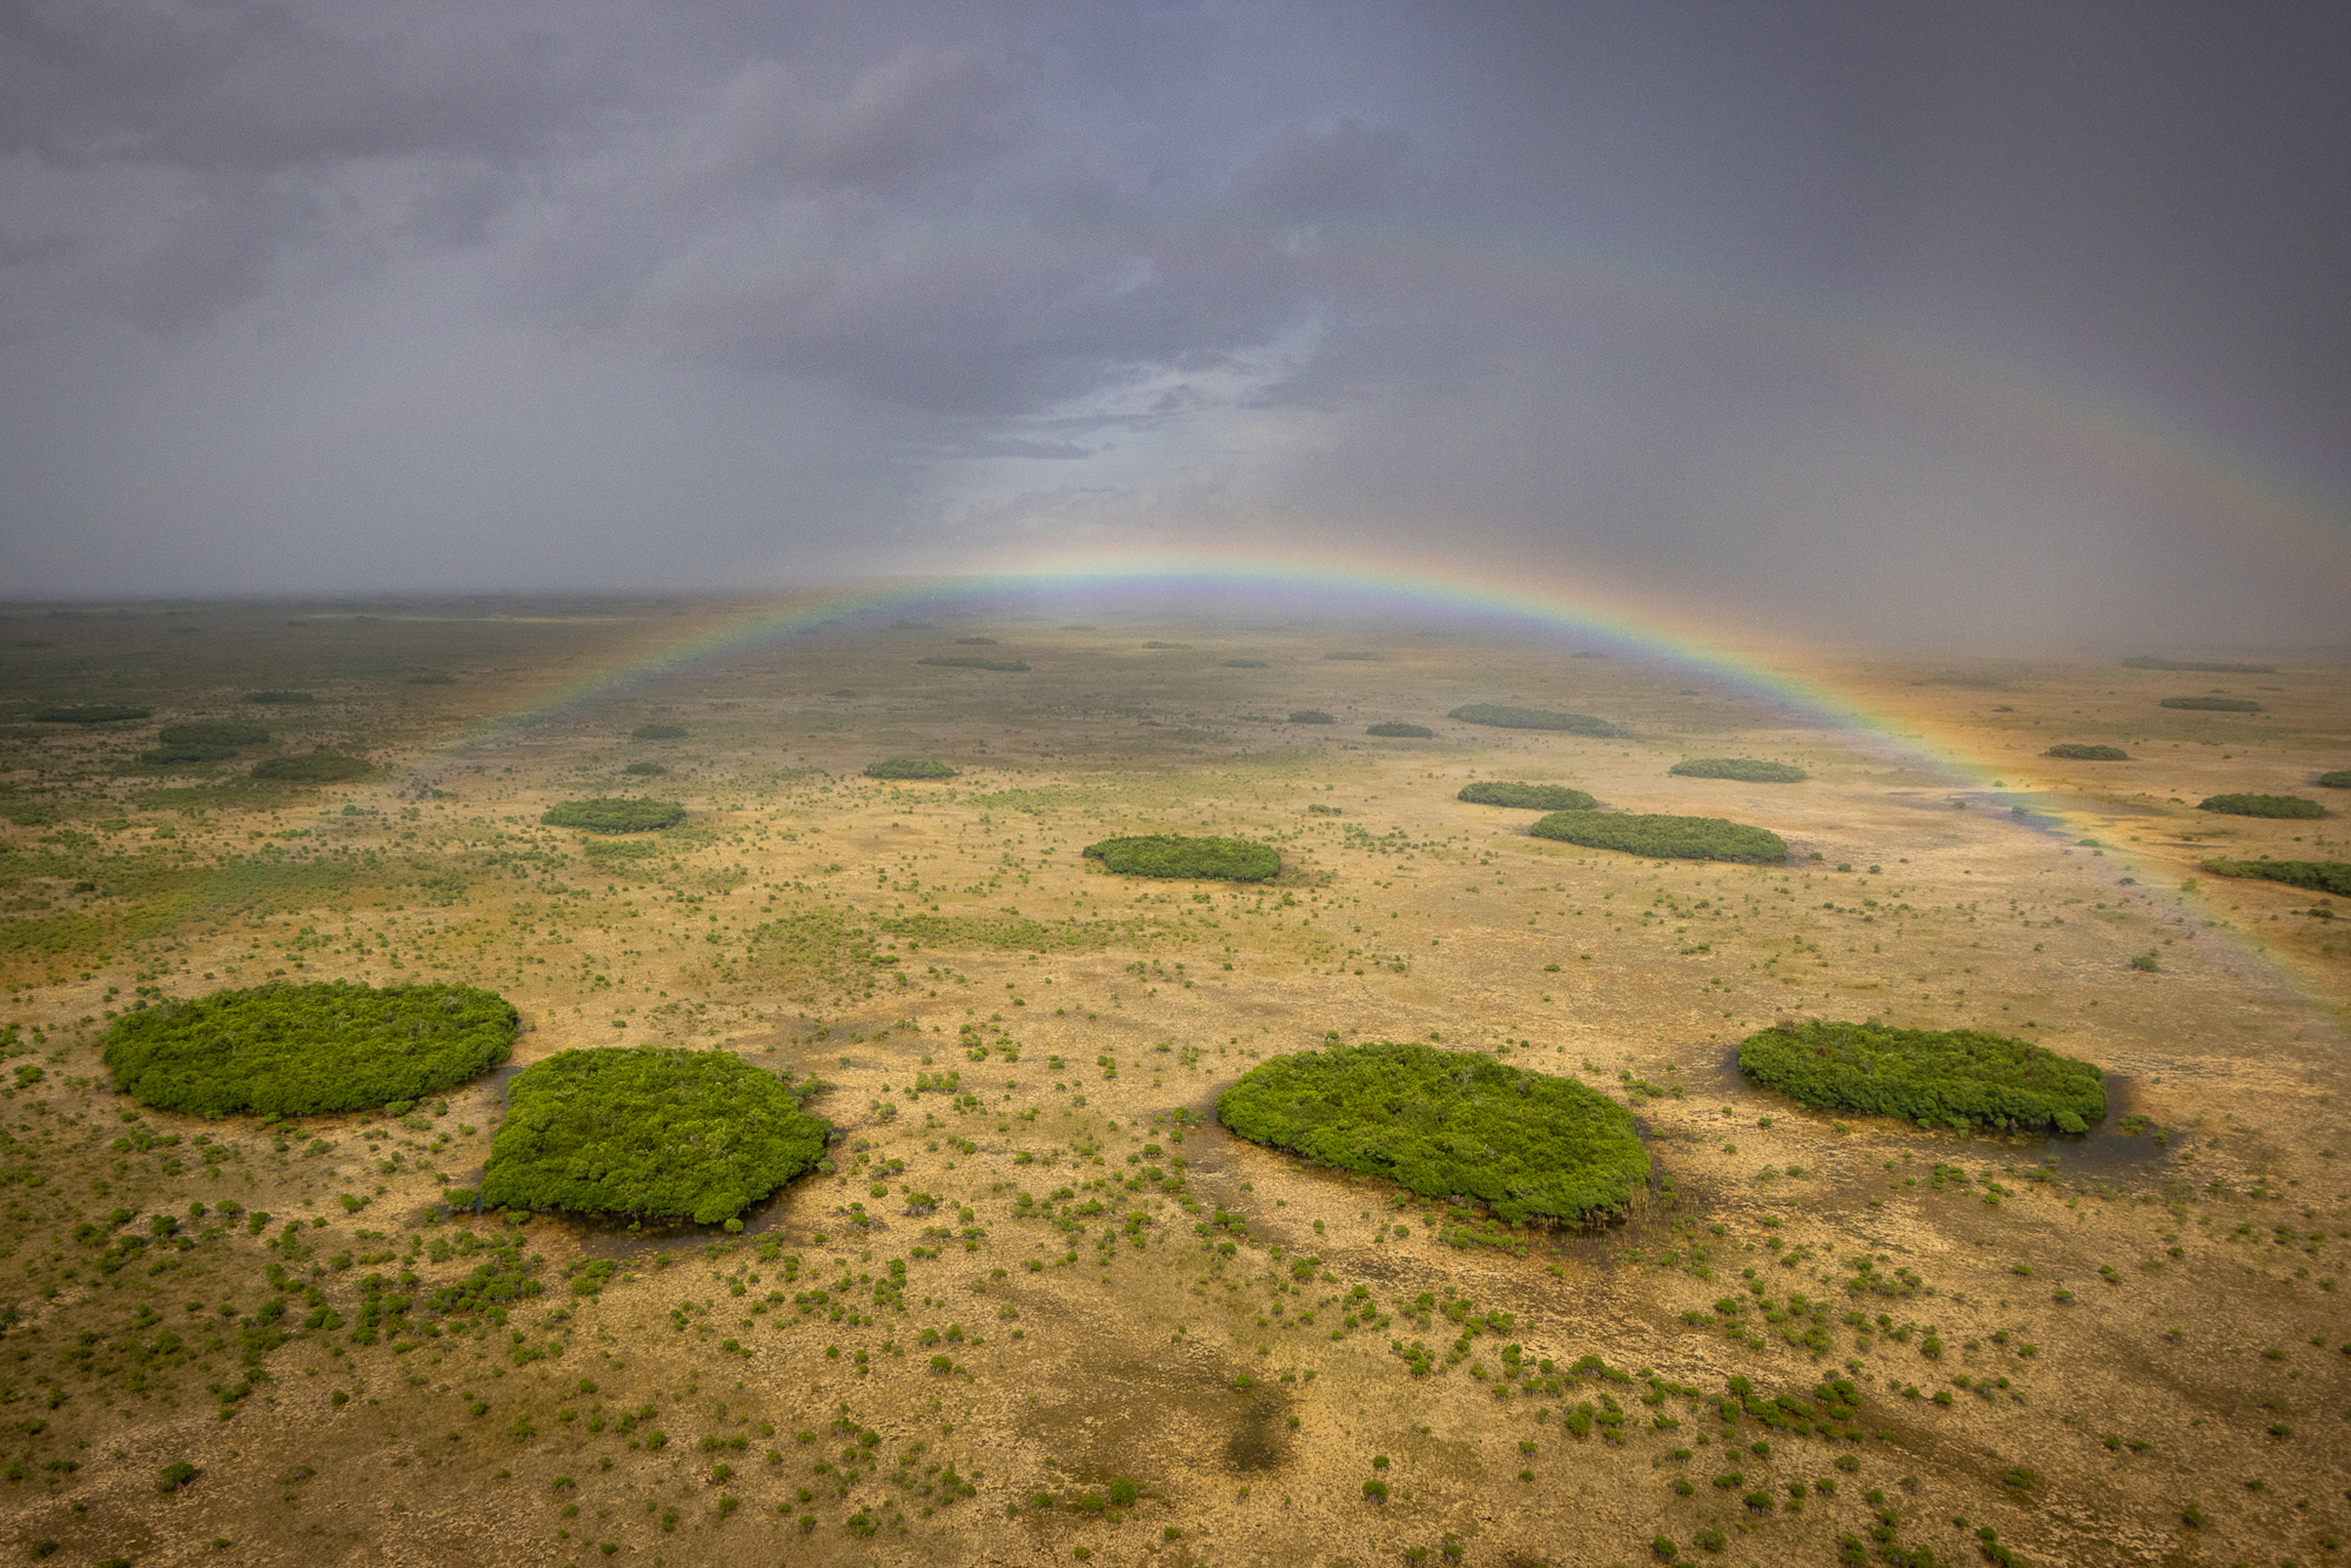 rainbows arch over this nutrient-low swathe of the Everglades